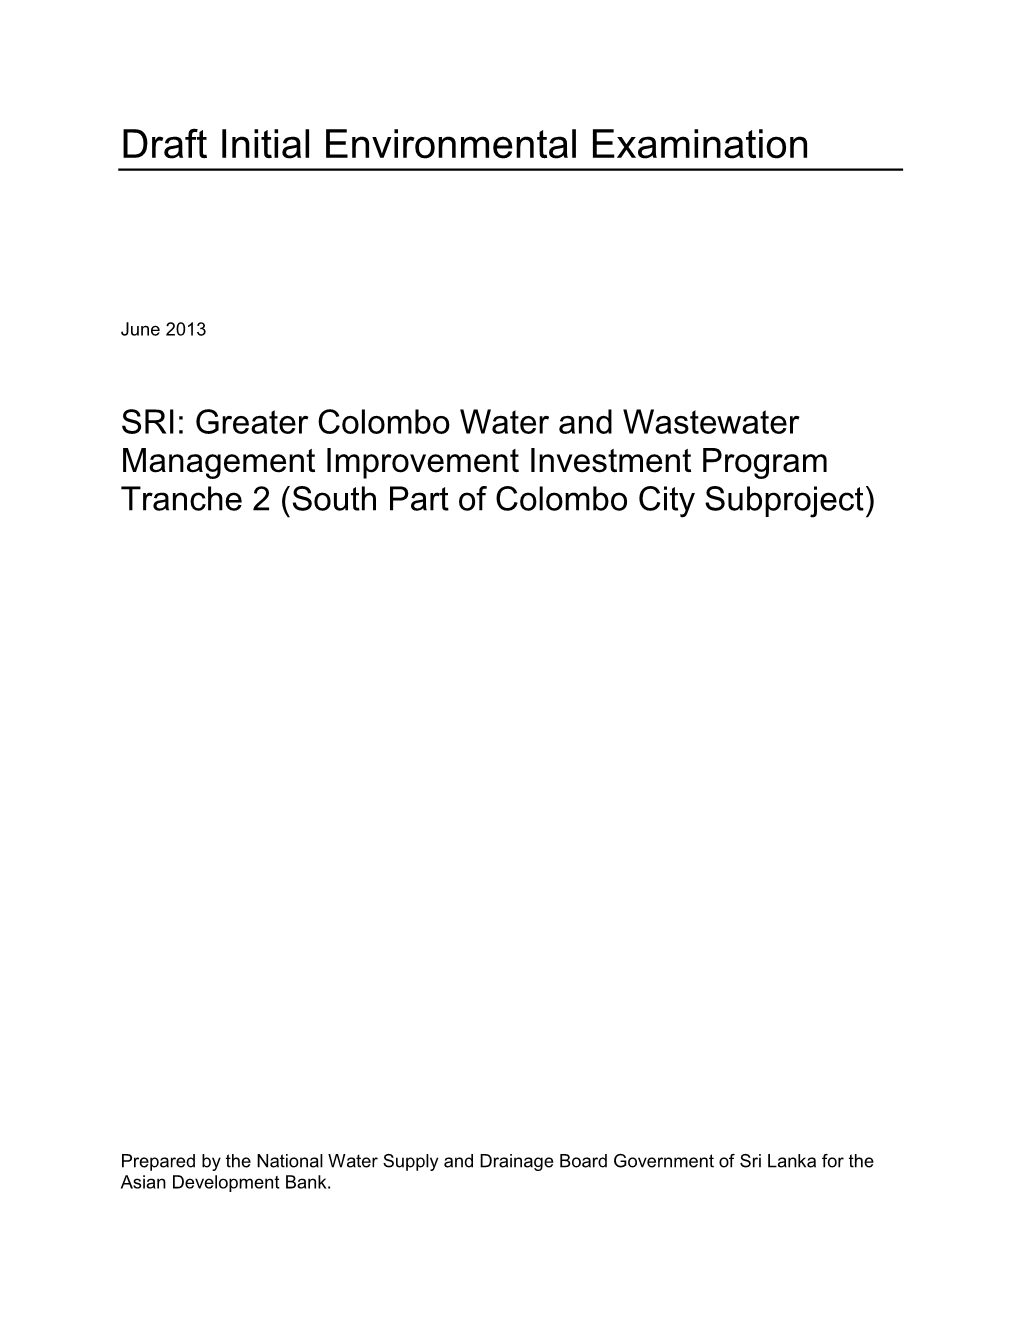 45148-007: Greater Colombo Water And